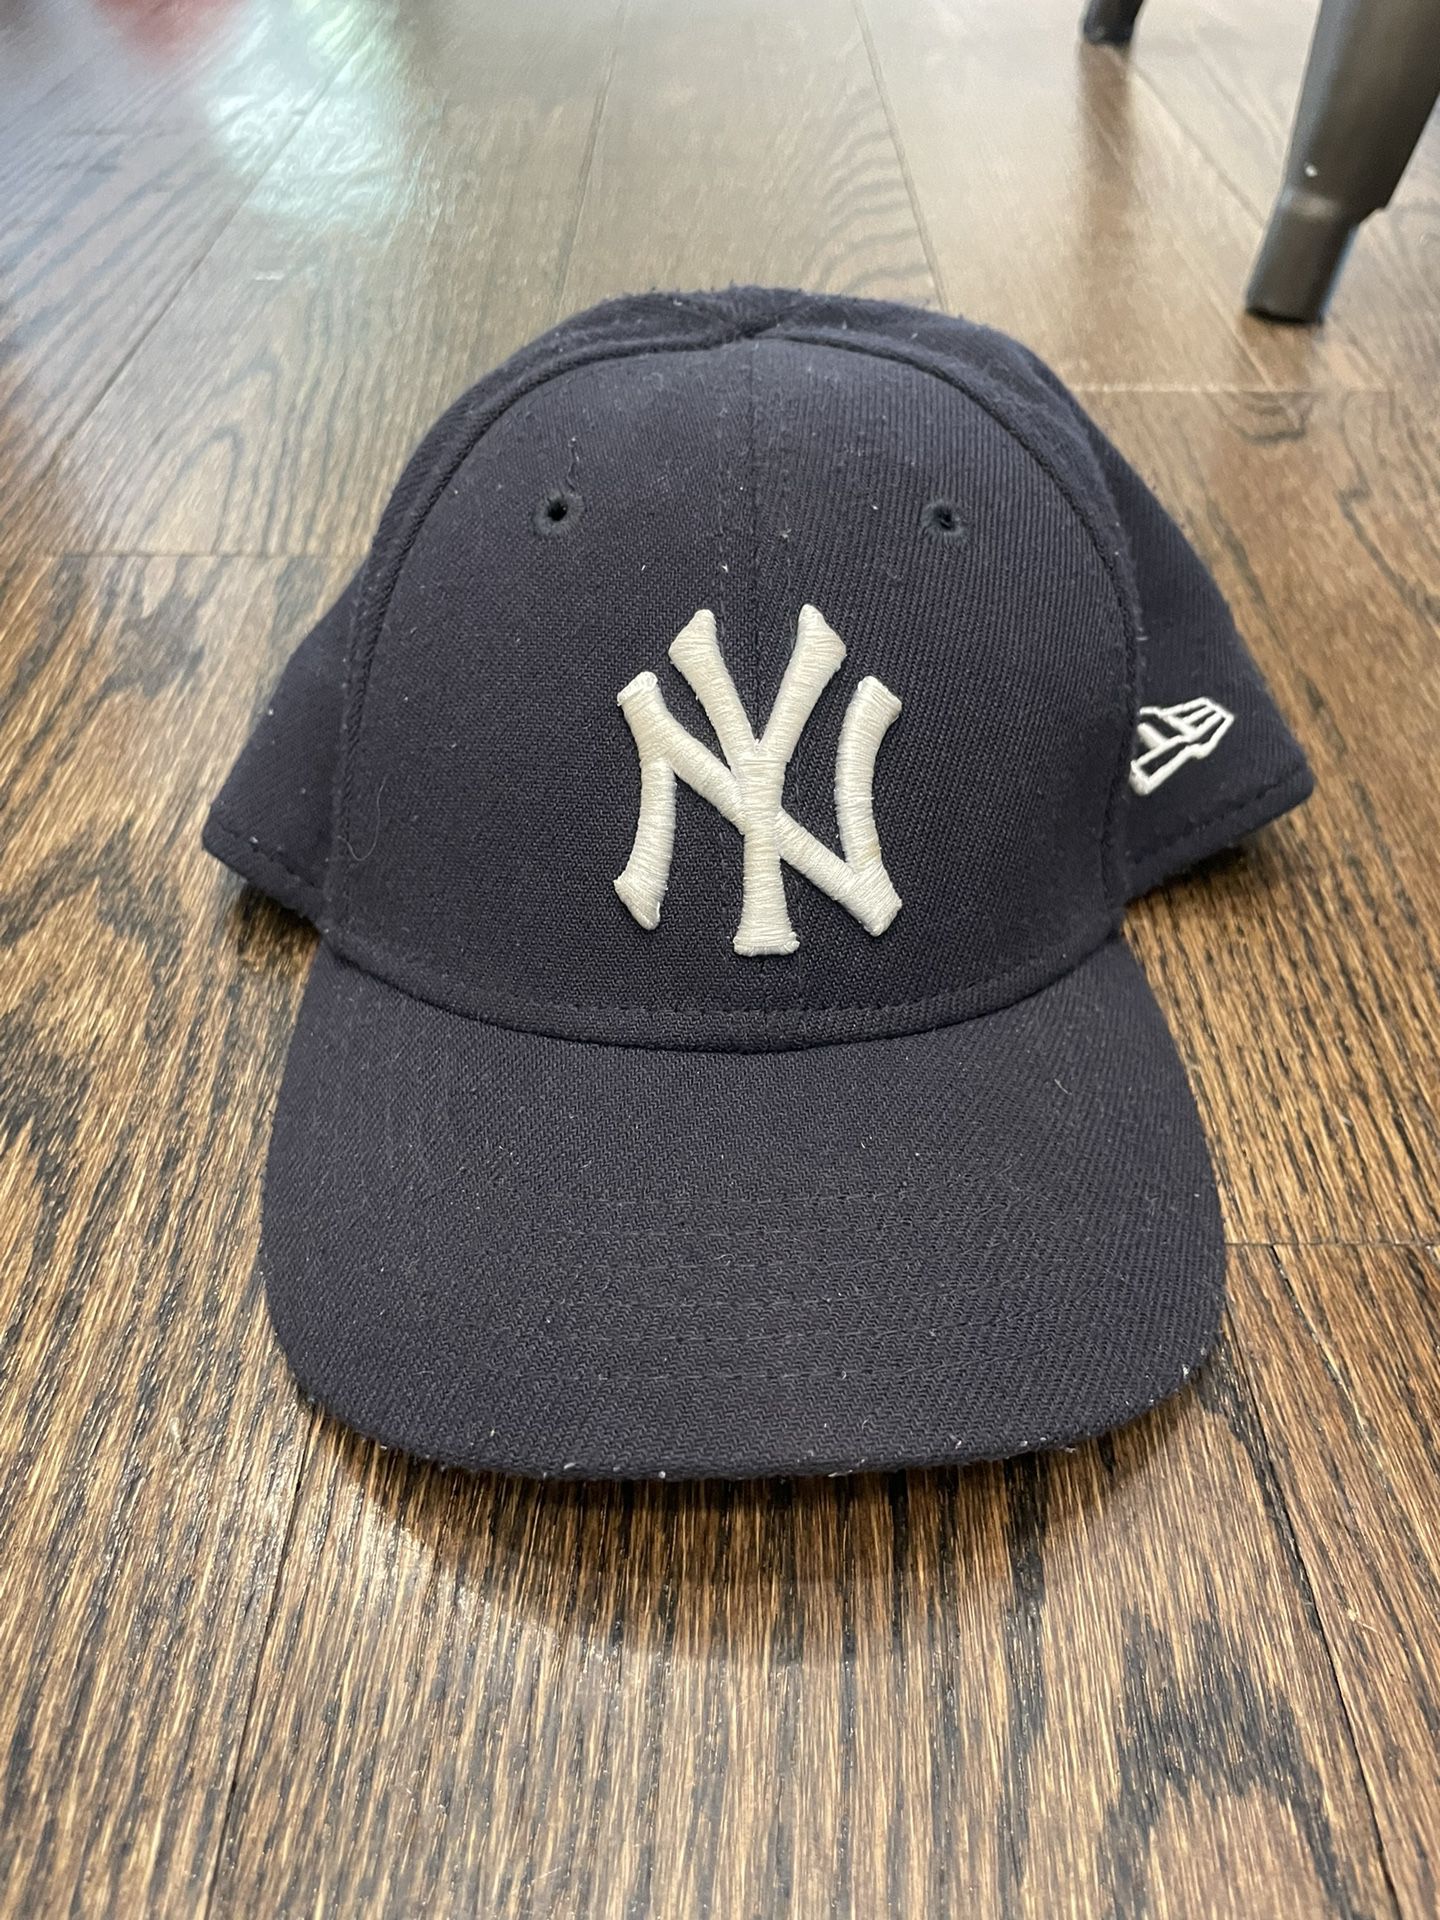 KIDS/TODDLER YANKEE FITTED HAT for Sale in Staten Island, NY